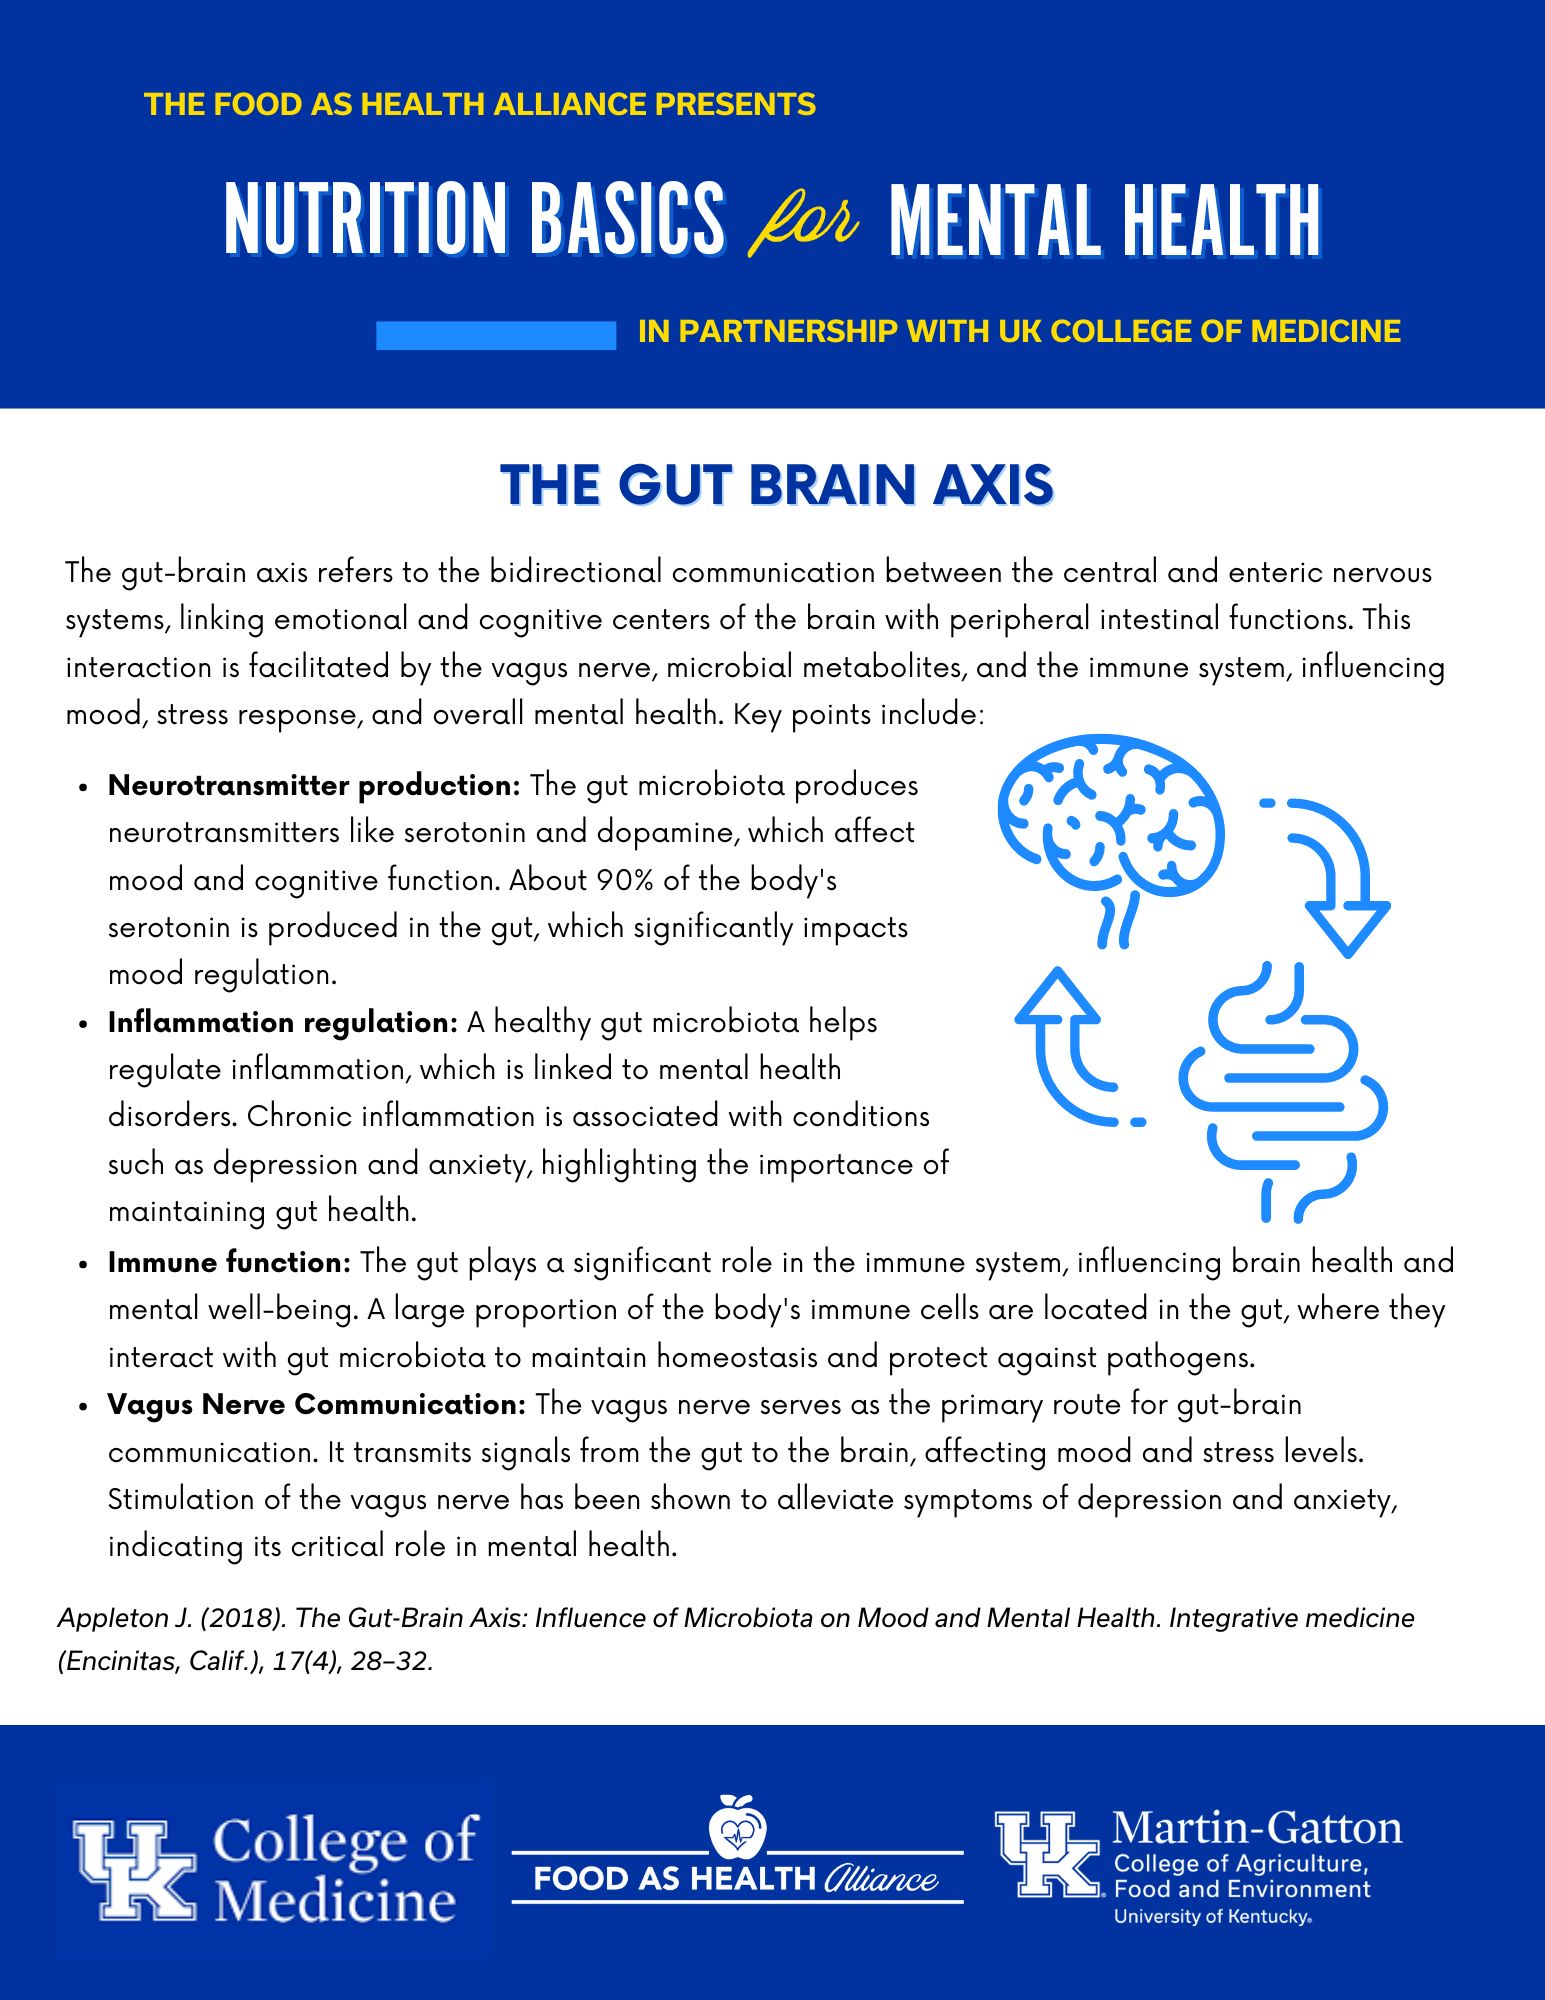 Image of first page of mental health handout